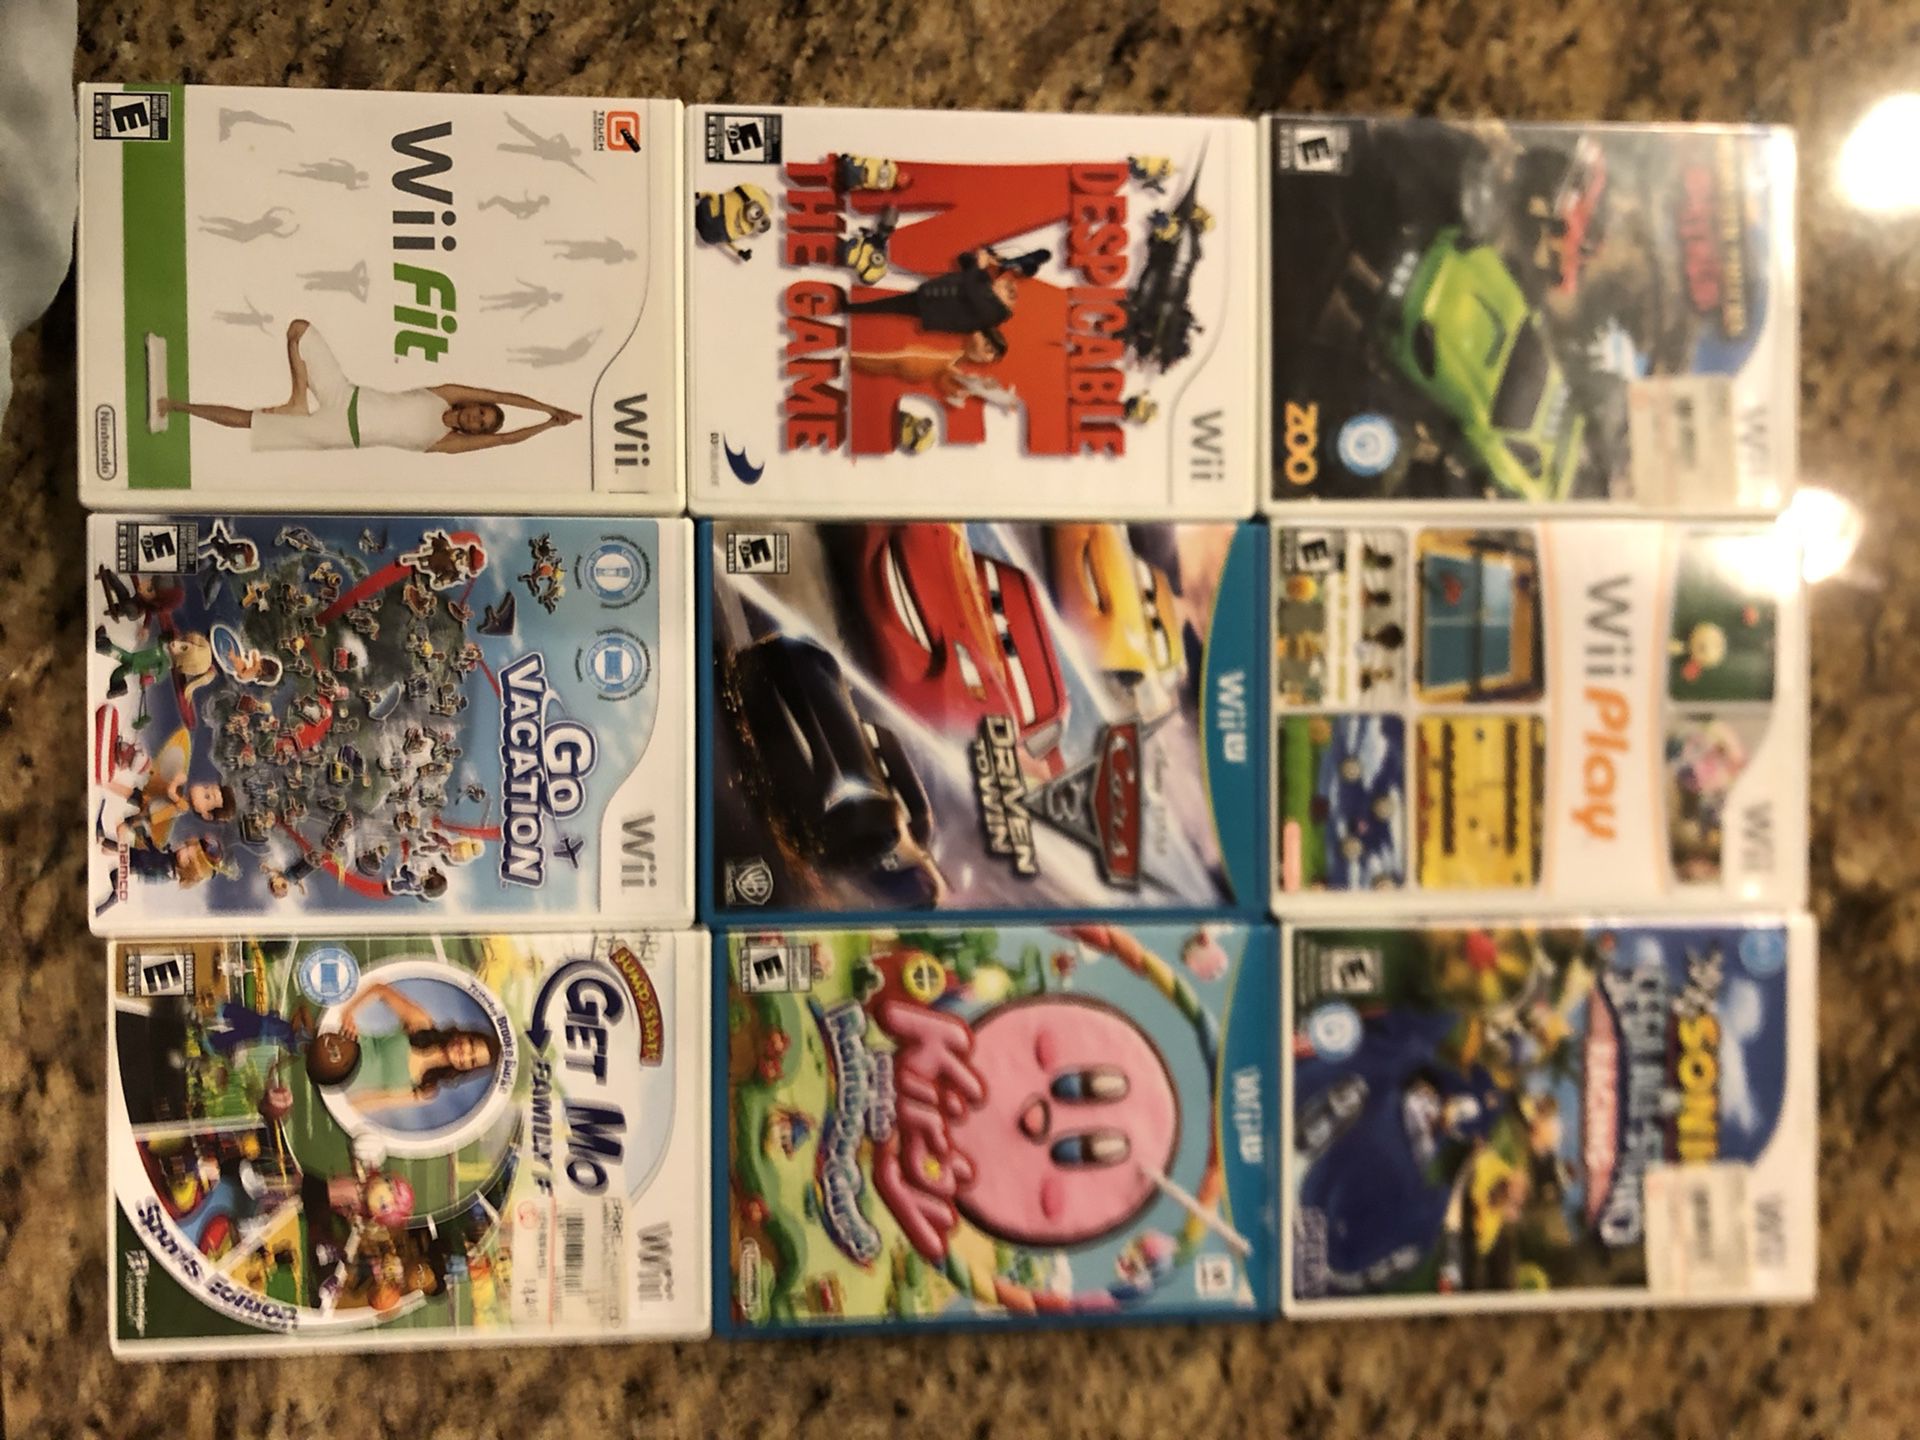 Nintendo Wii Games and Wii Fit board